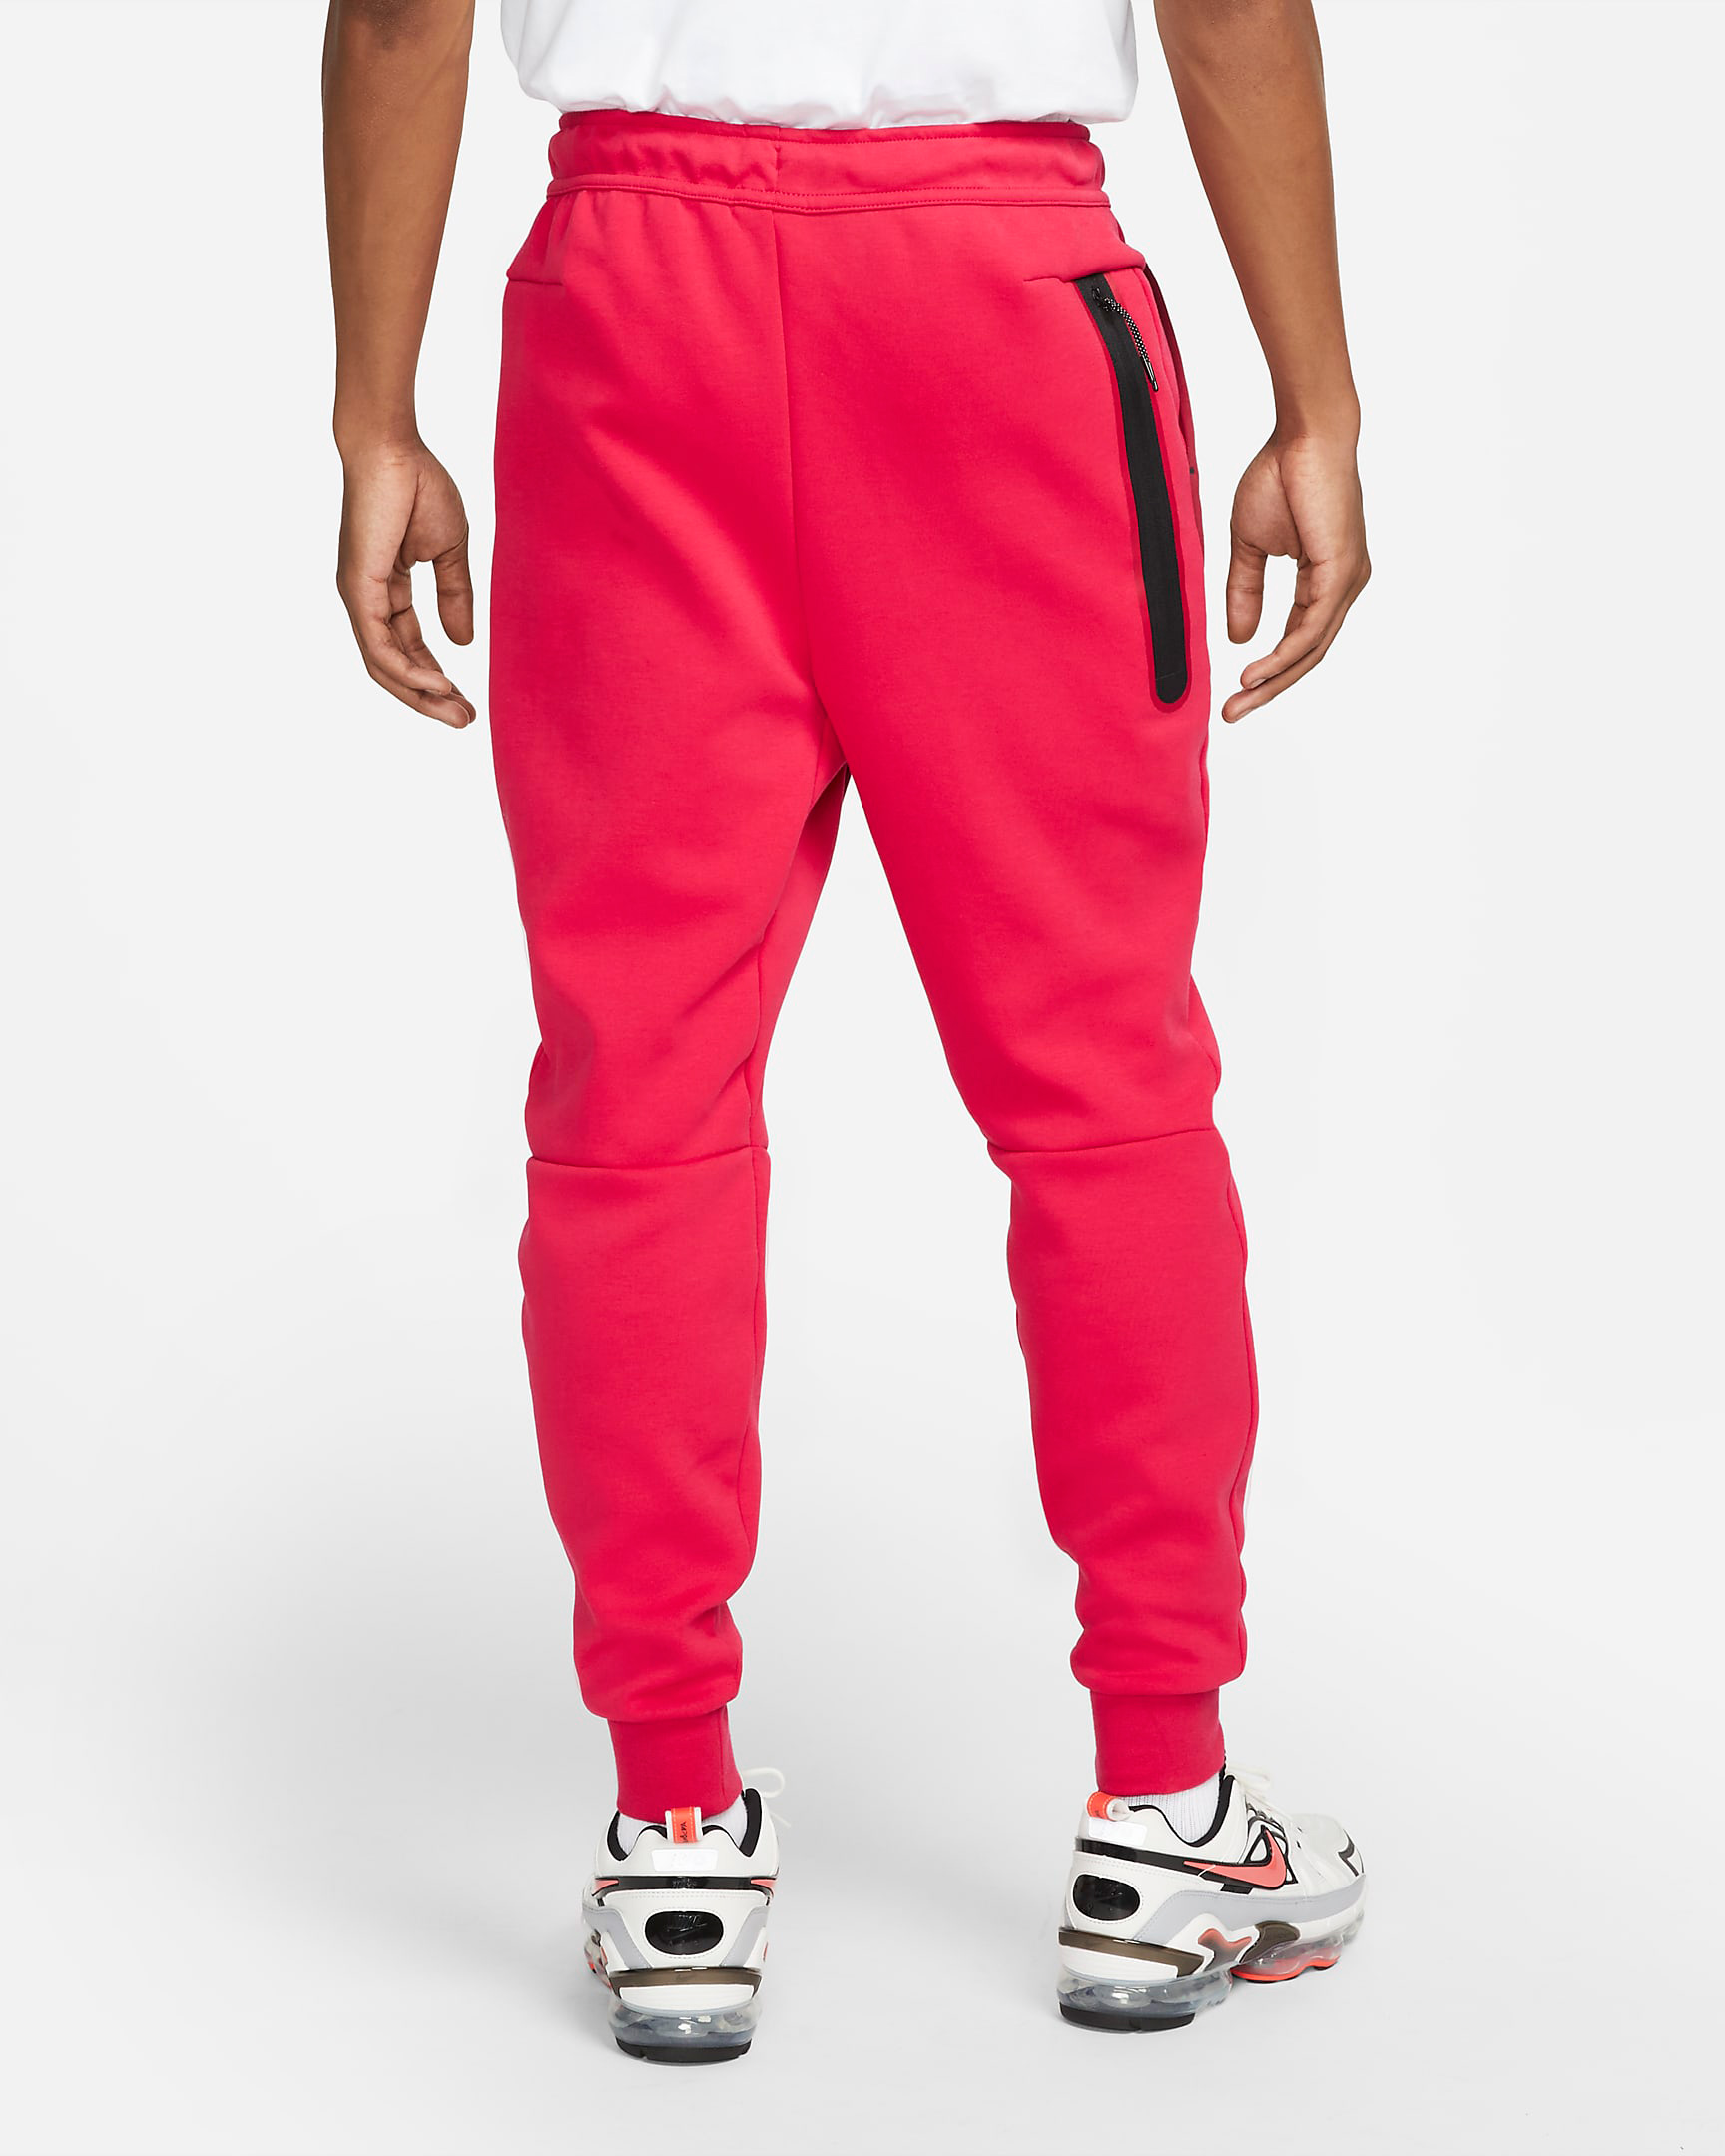 Nike Tech Fleece Hoodie and Pants in Very Berry Pomegranate